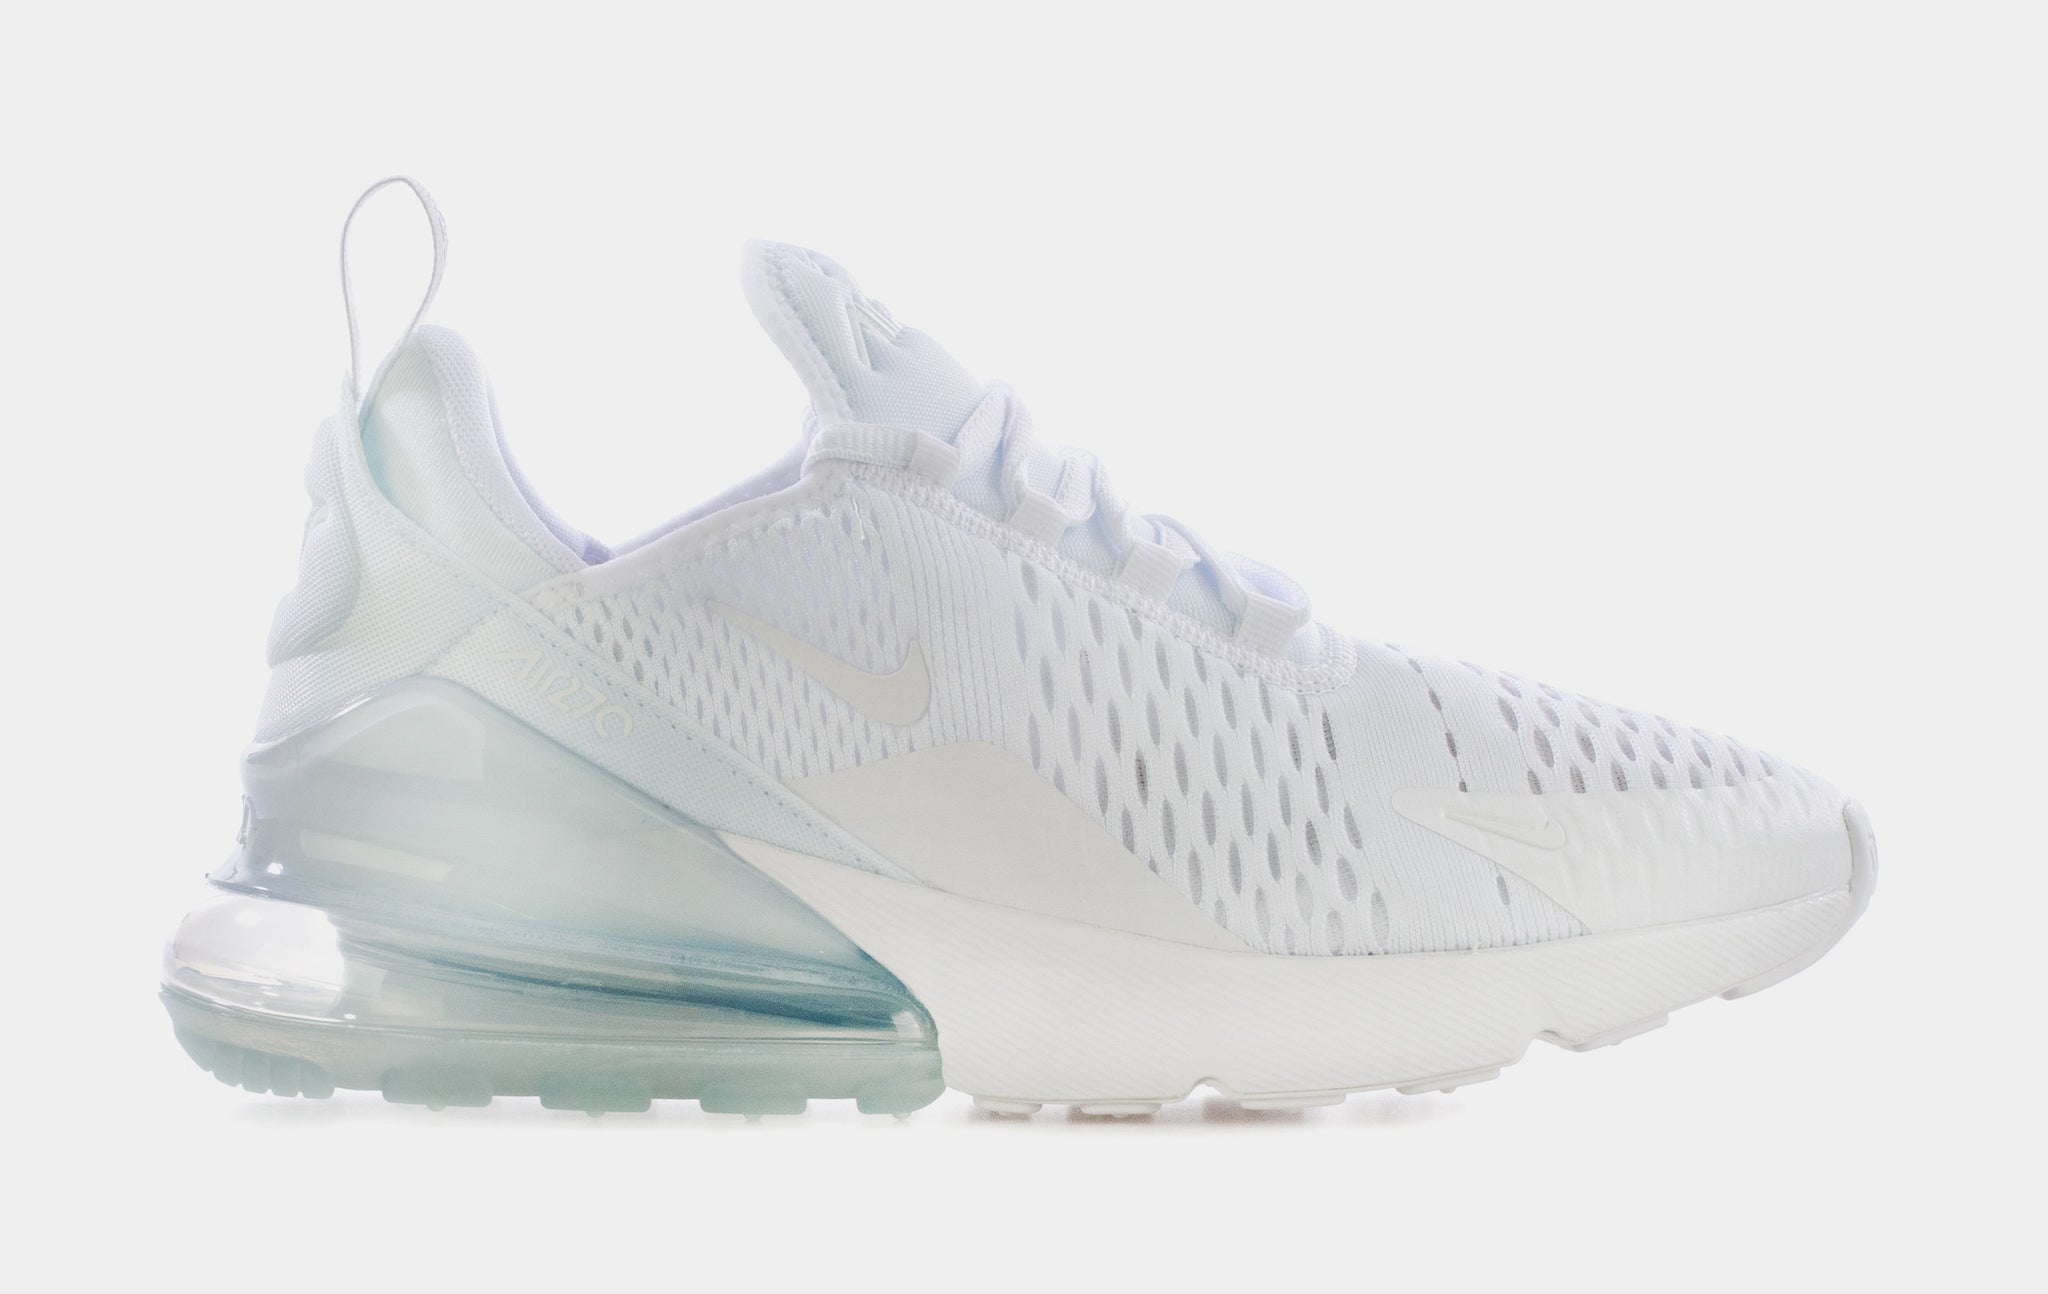 Air Max 270 School Lifestyle Shoes White 943345-103 Shoe Palace